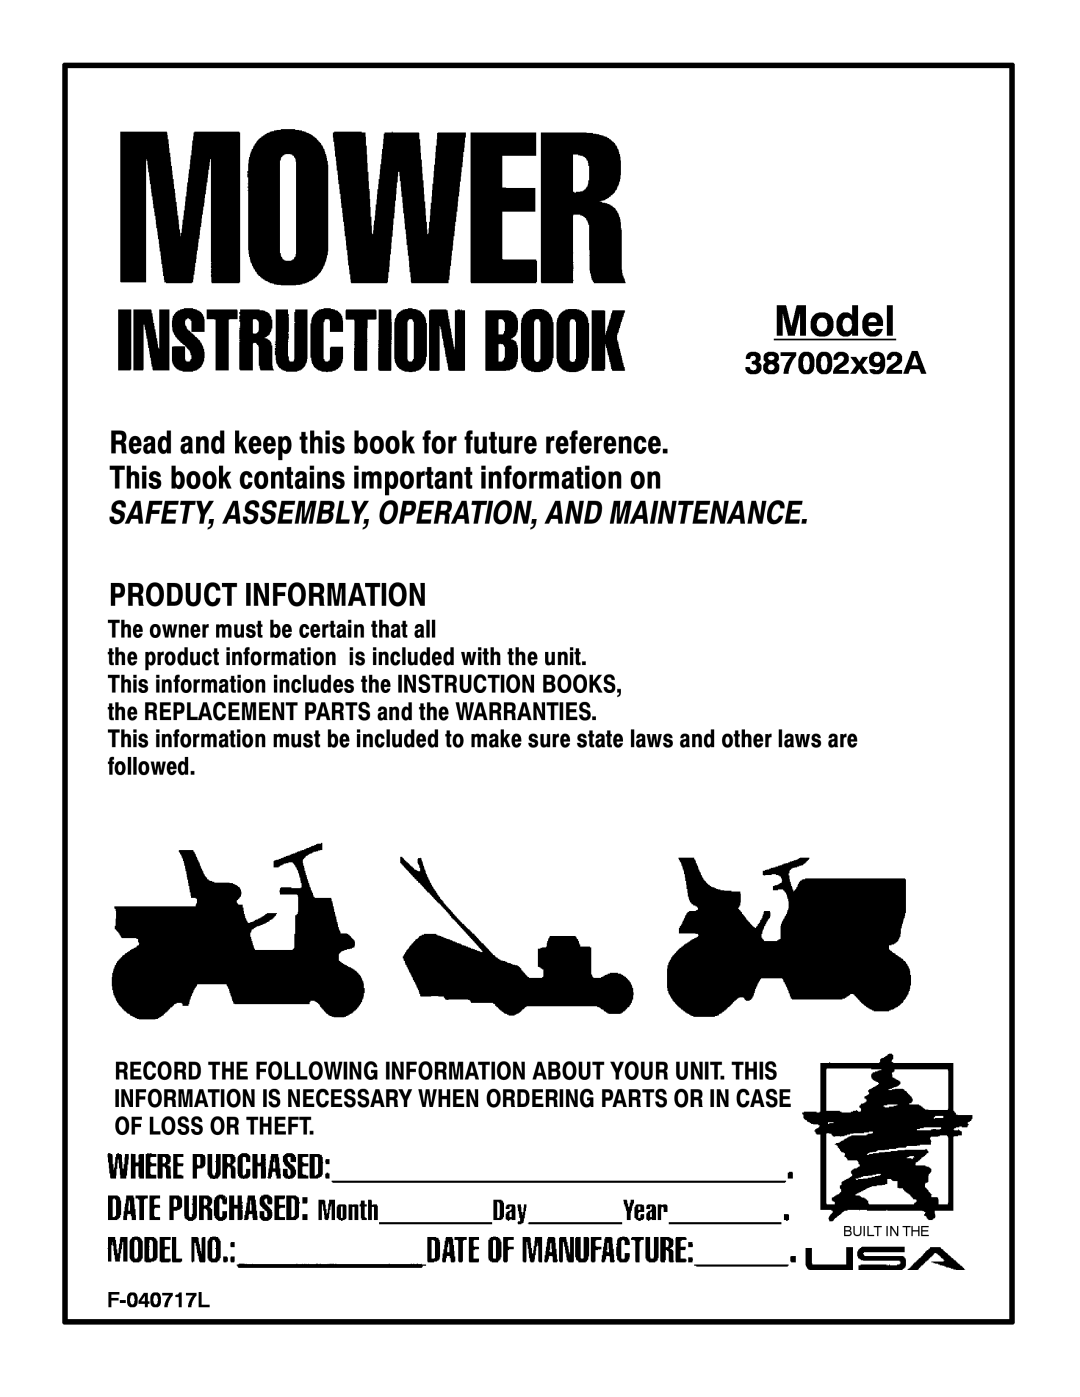 Murray 387002x92A manual Model, Read and keep this book for future reference, This book contains important information on 